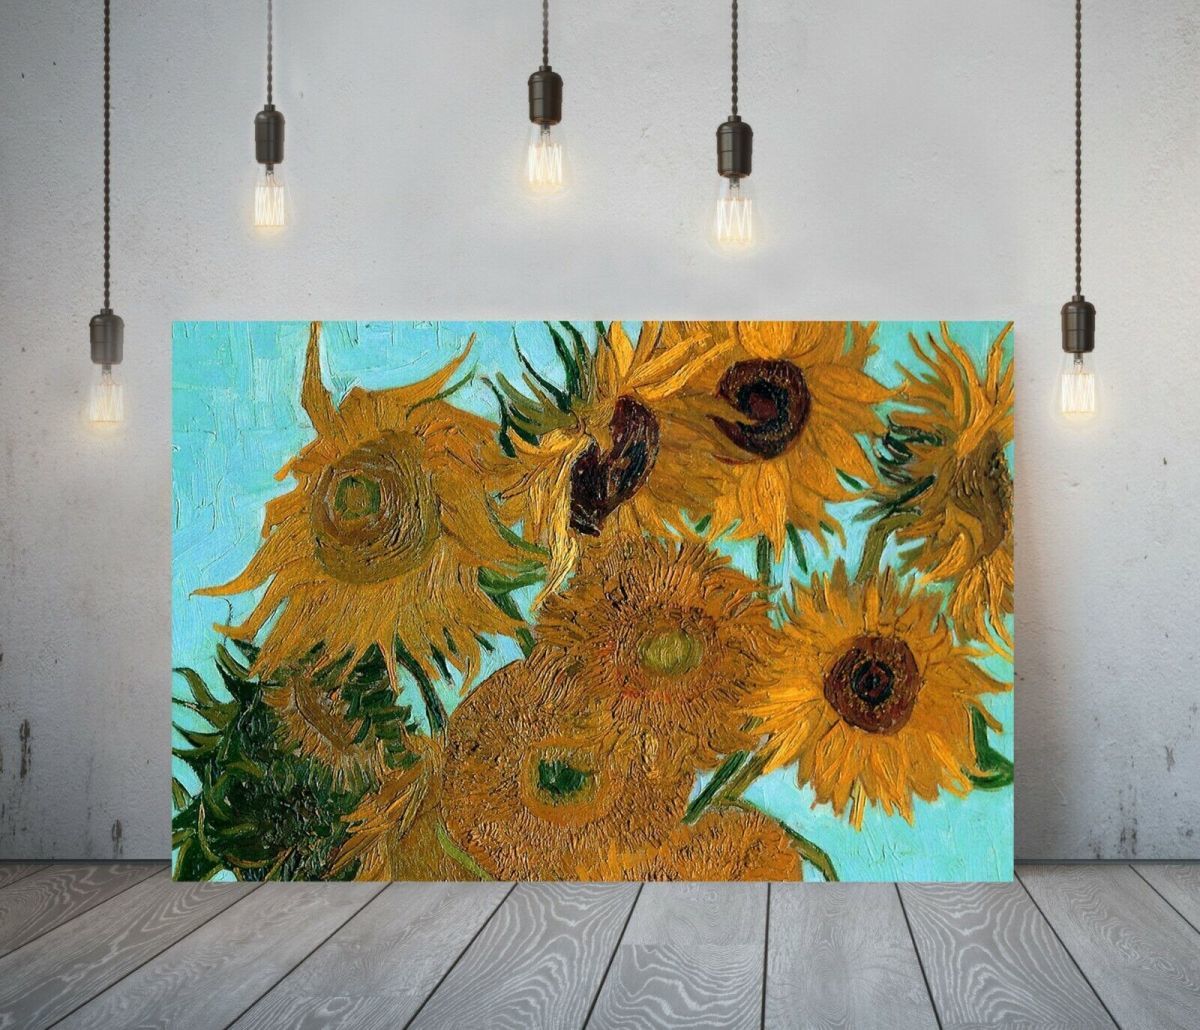 Van Gogh Sunflowers Poster High Quality Canvas Framed Picture A1 Art Panel Nordic Foreign Painting Goods Interior 9, Printed materials, Poster, others